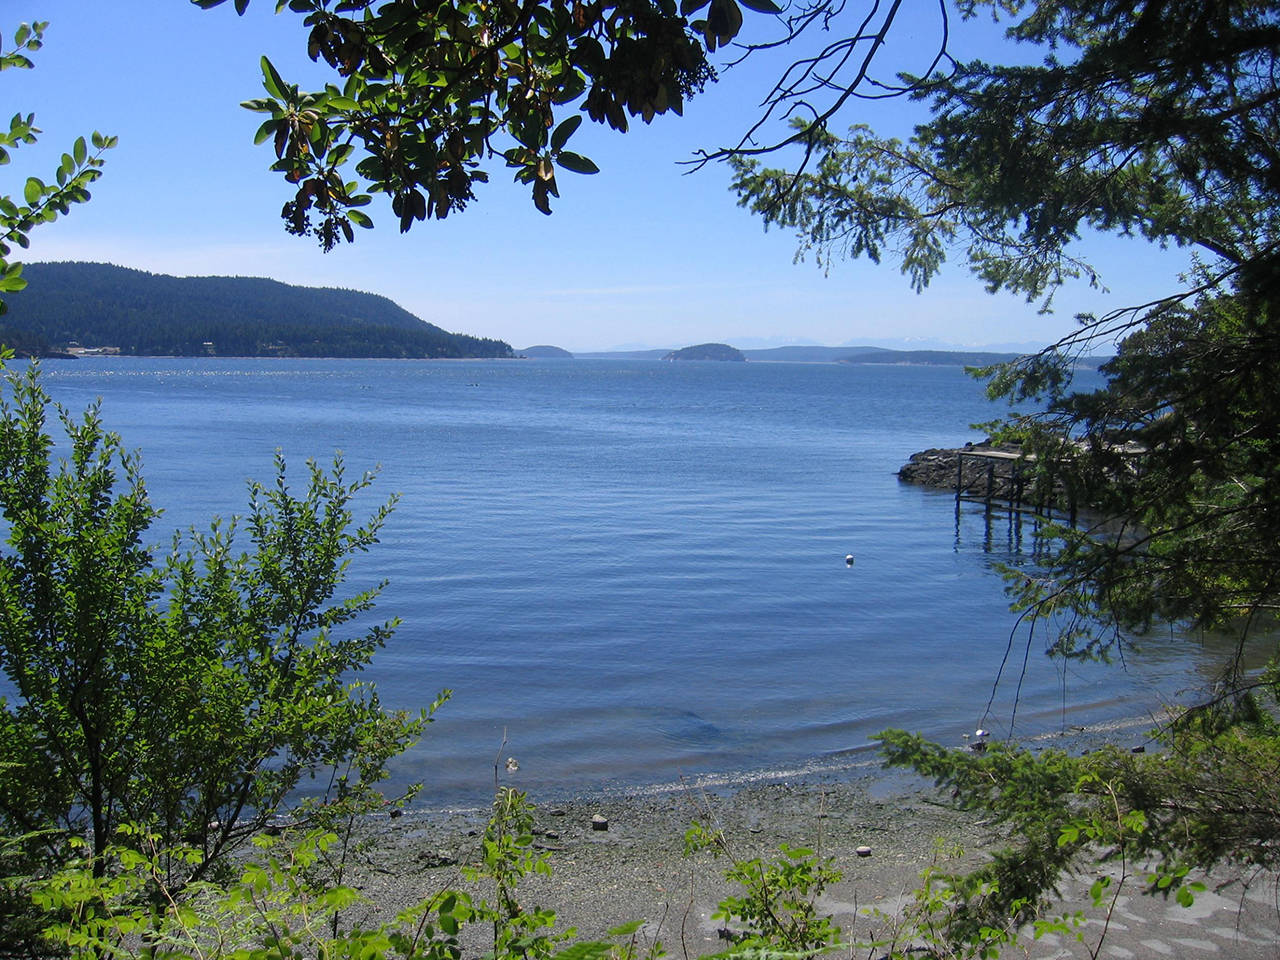 Washington State Parks acquires 134-acre Point Lawrence property on Orcas